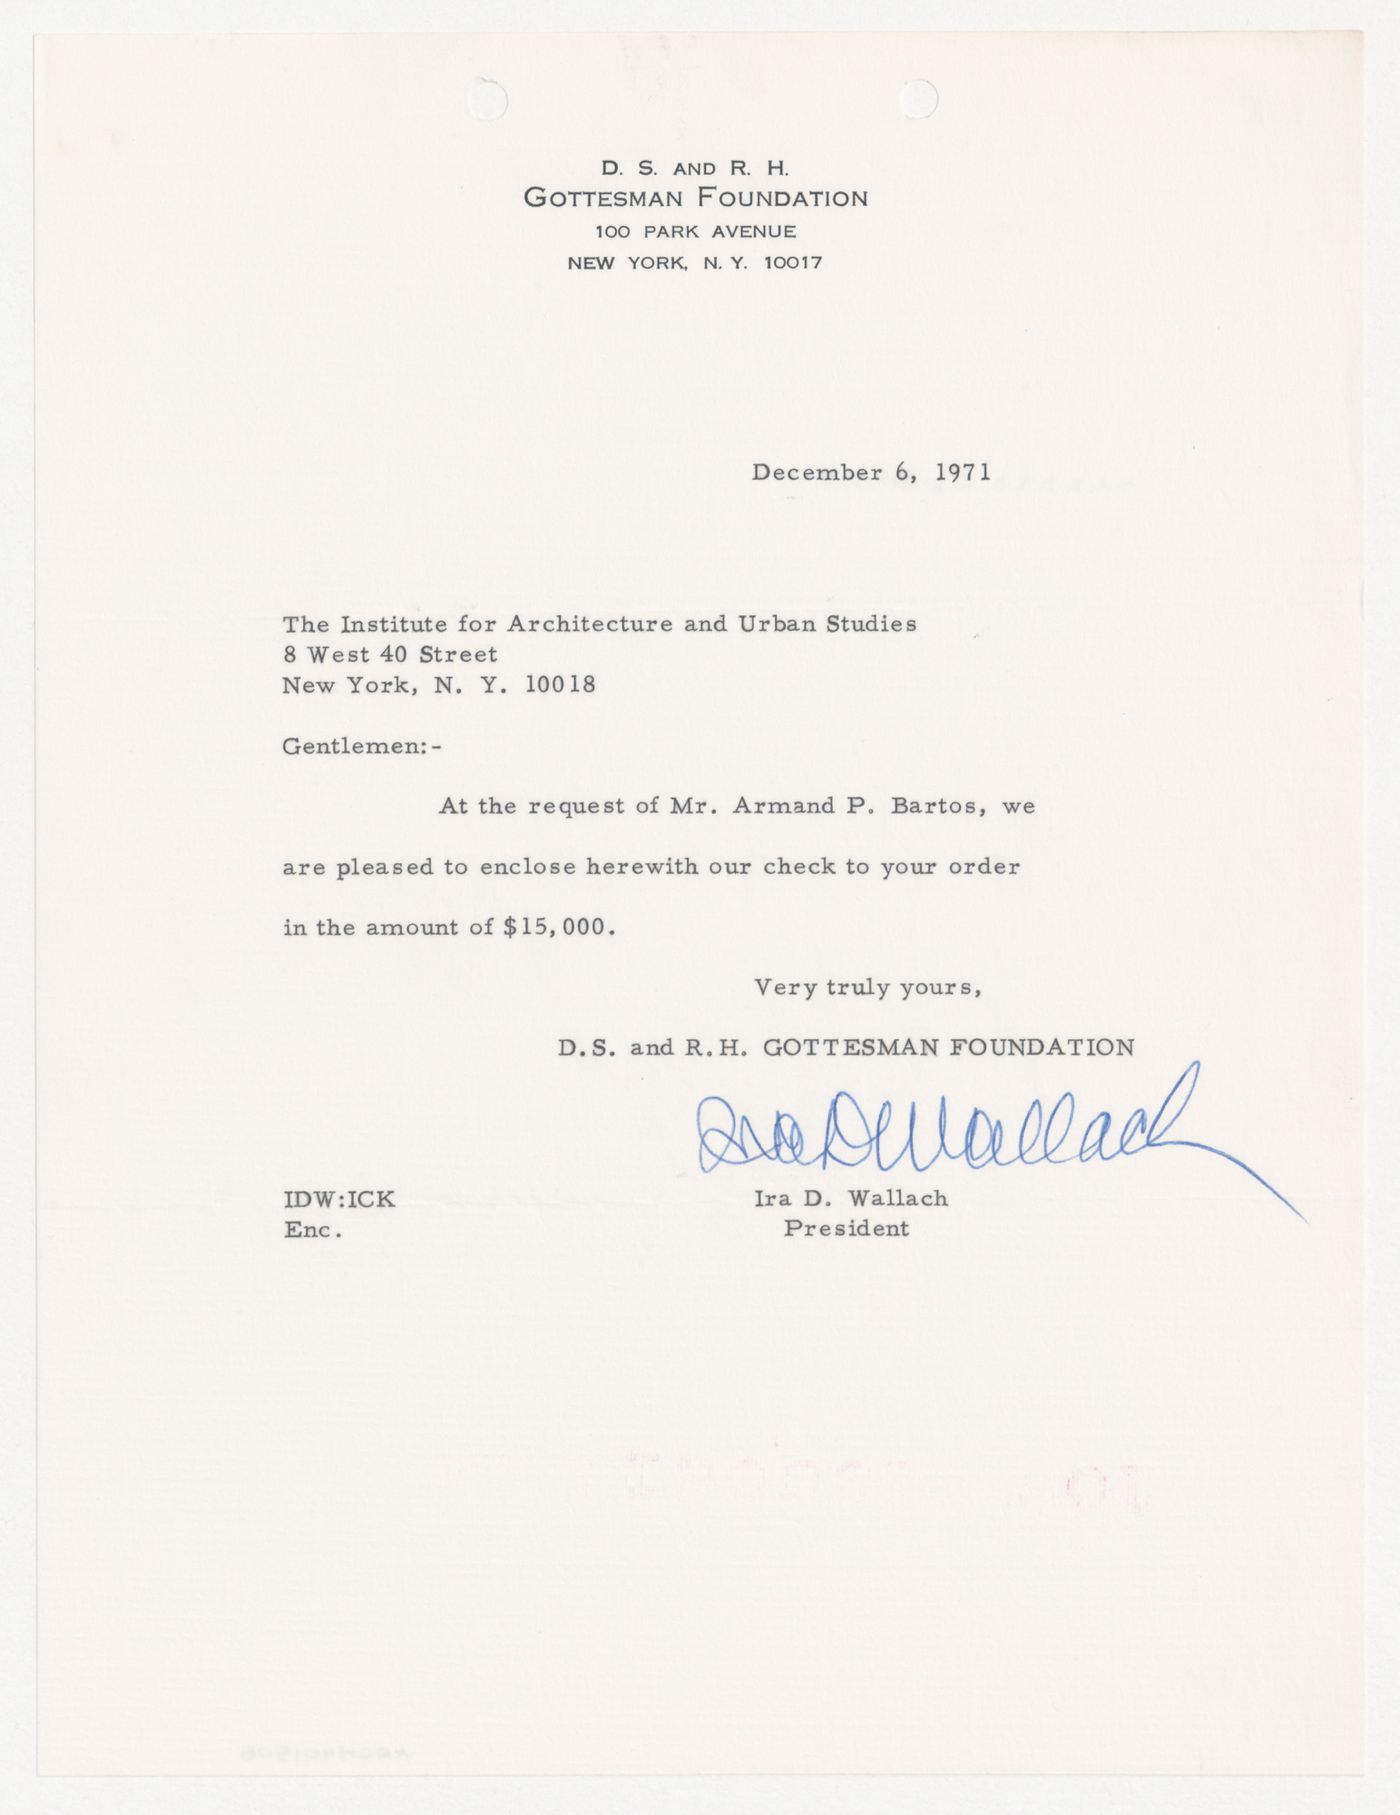 Letter from Ira D. Wallach to IAUS about funding from the D. S. and R. H. Gottesman Foundation